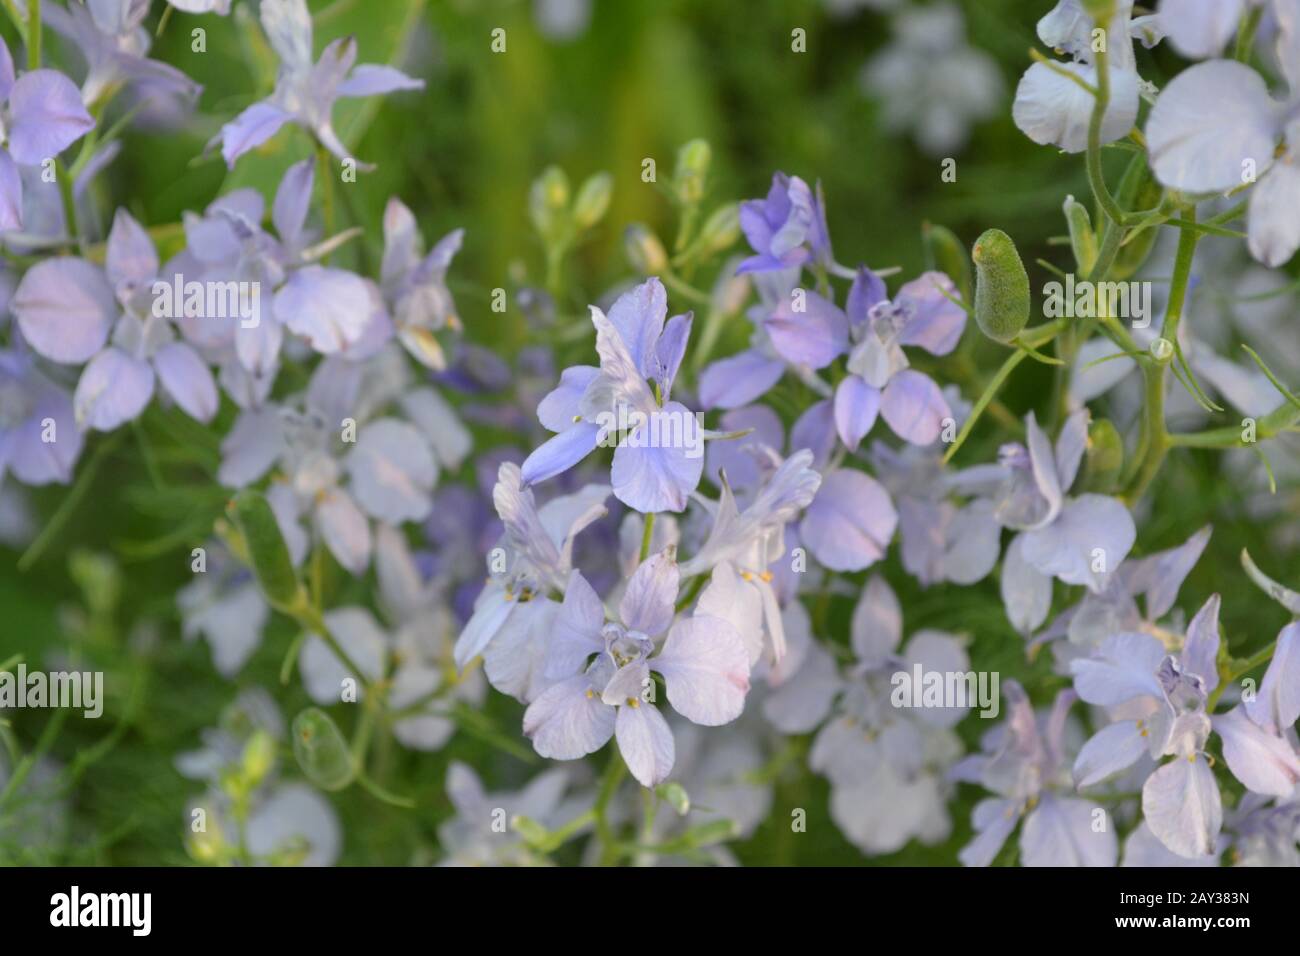 Consolida. Delicate flower. Flower pale purple. Small flowers on the stem. Among the green leaves. Garden. Field. Growing flowers. On blurred backgrou Stock Photo